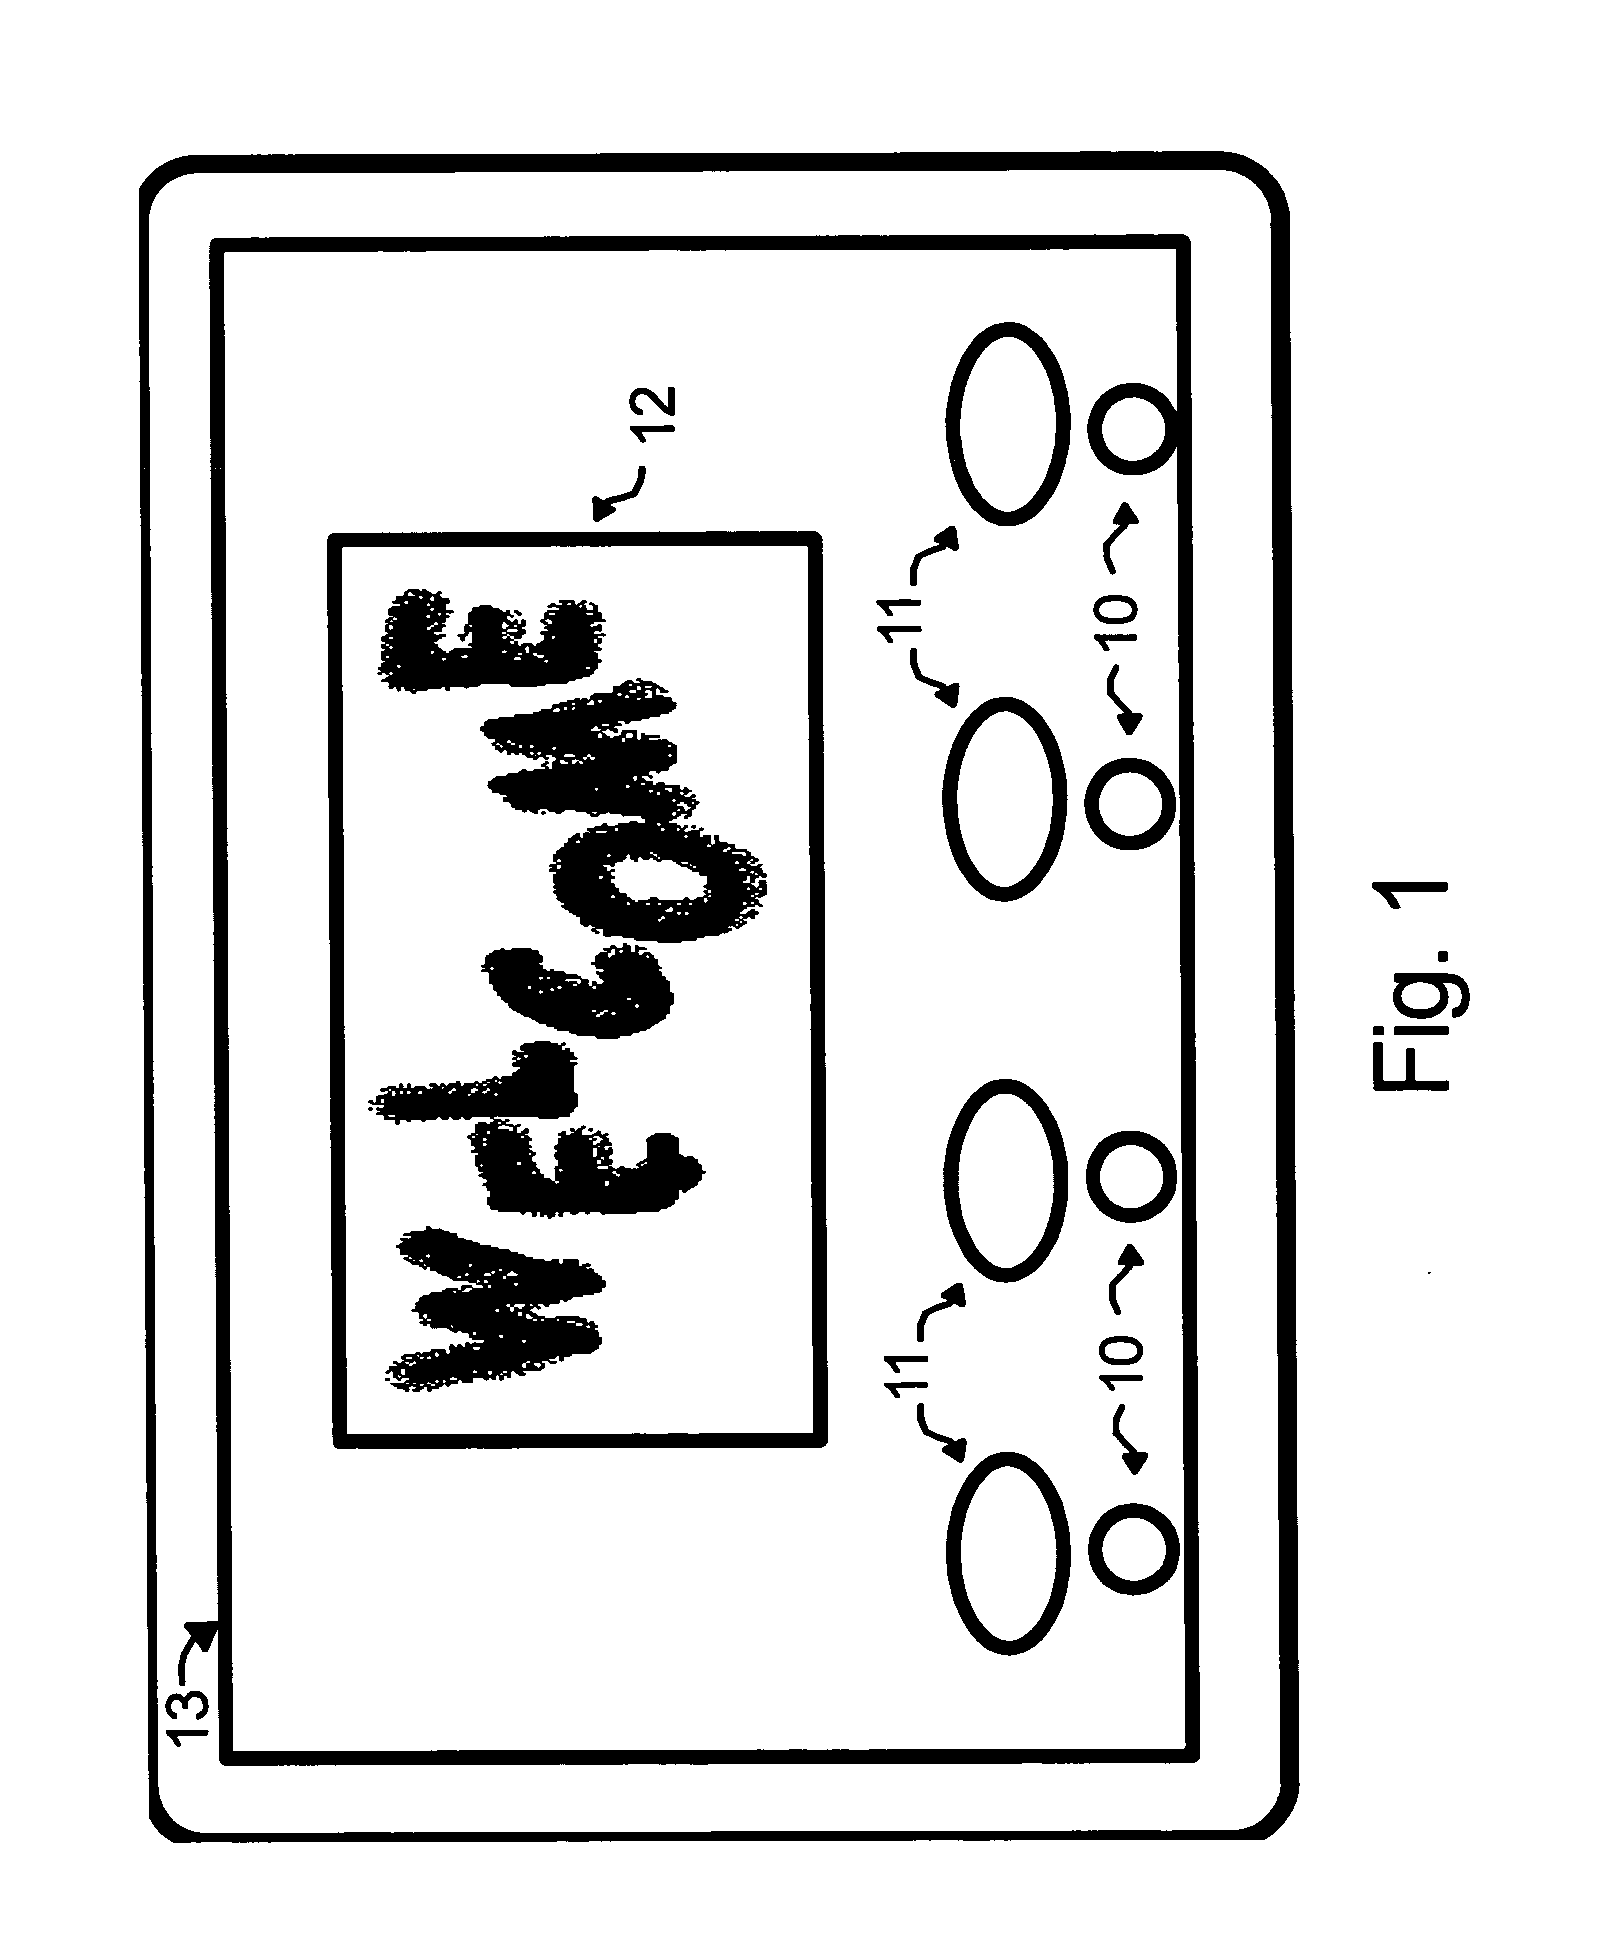 Graphical paging unit, a system including graphical paging units and the use of those